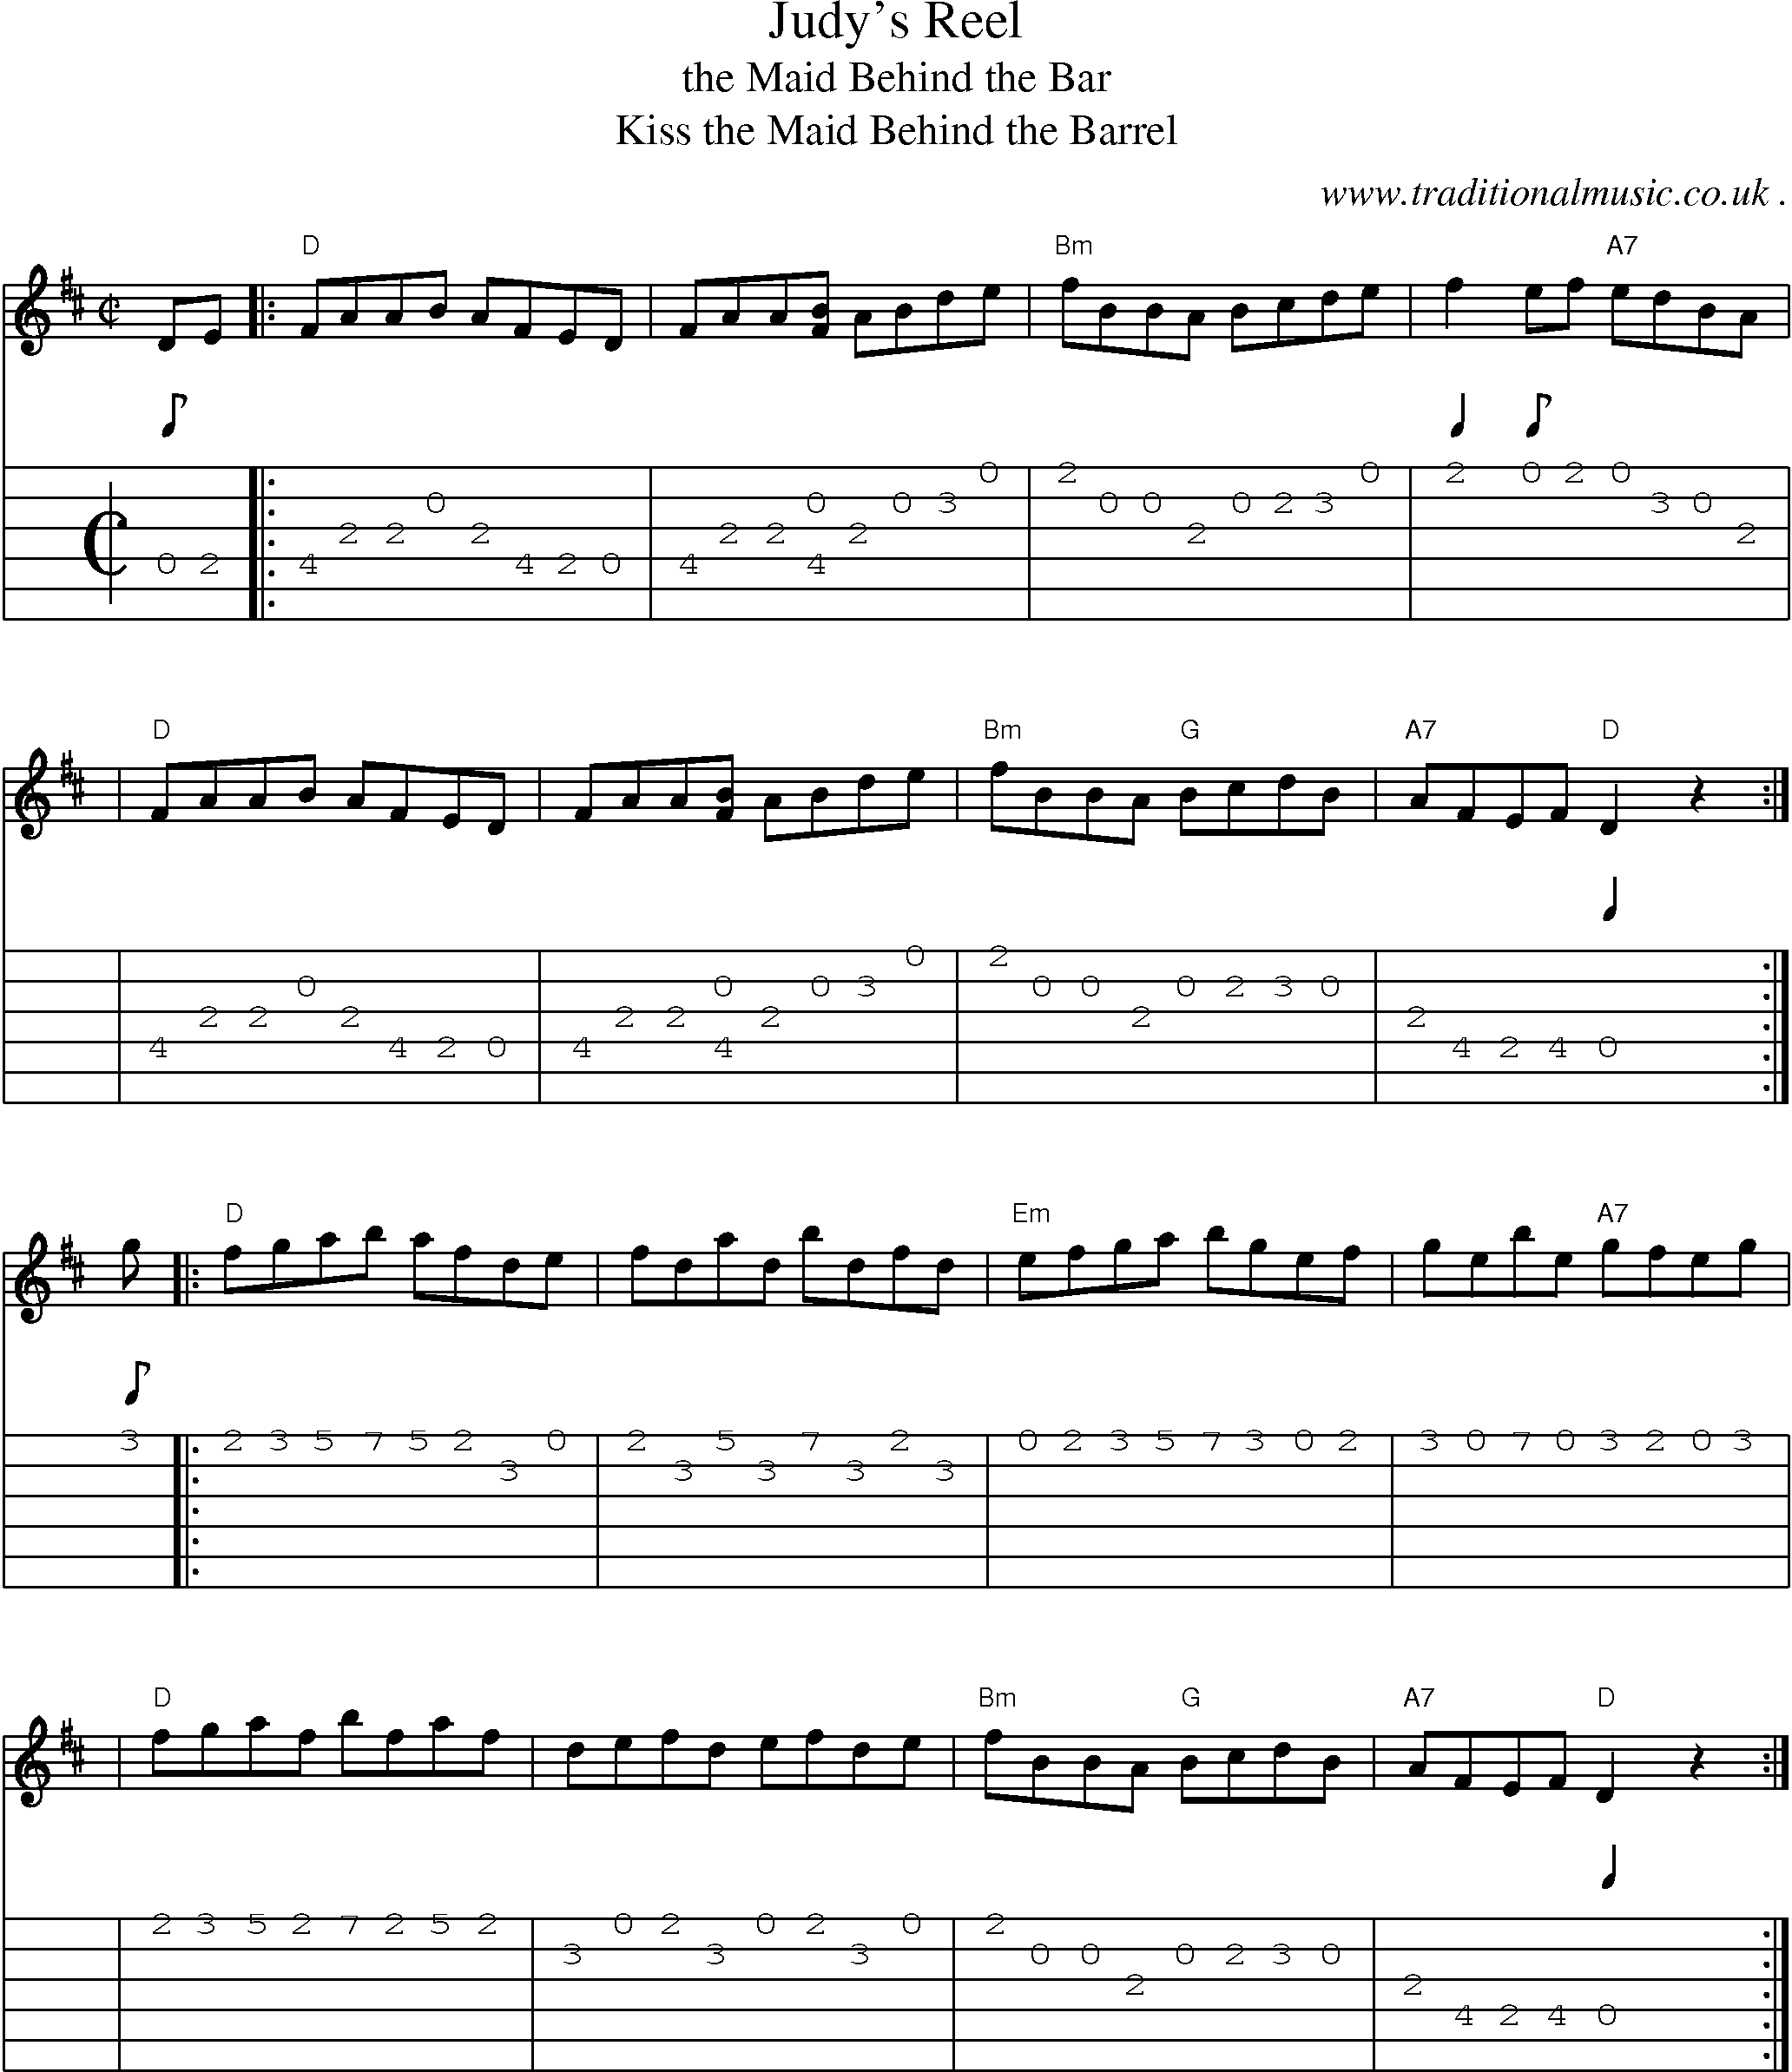 Sheet-music  score, Chords and Guitar Tabs for Judys Reel